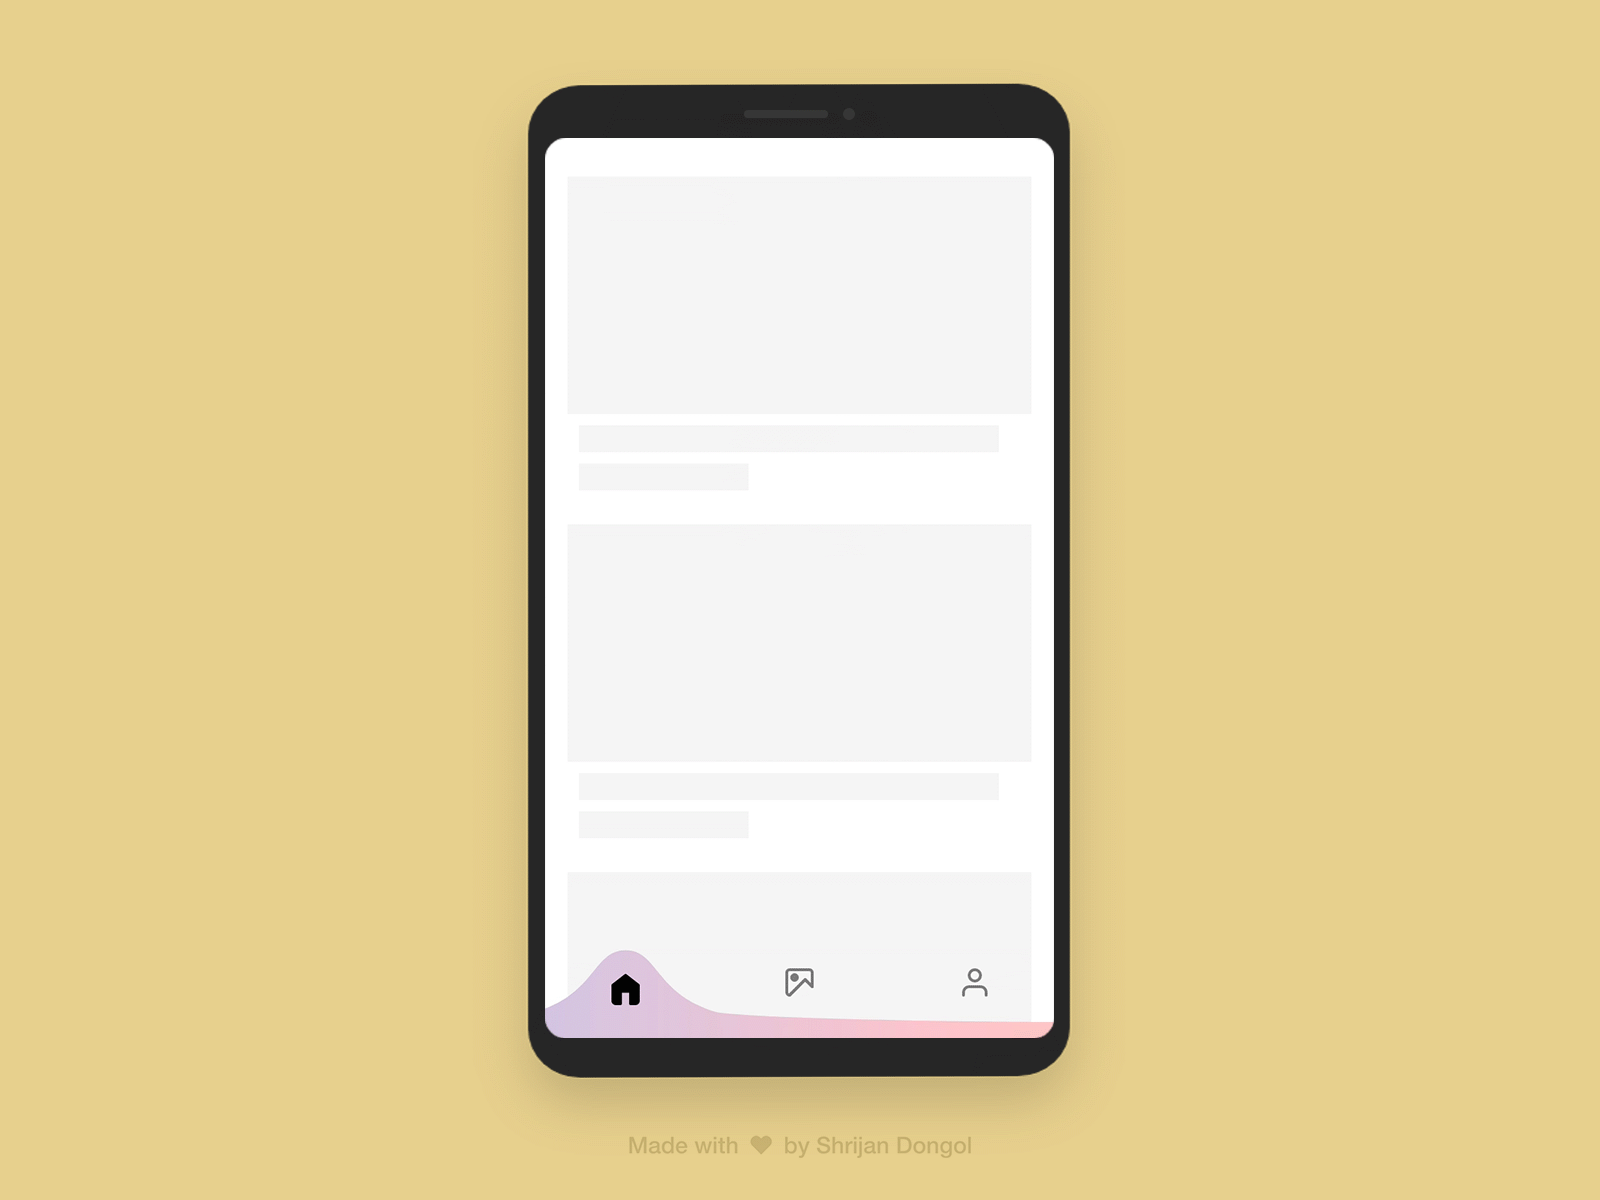 Navigation menu interactions and pull down to refresh. adobe xd animation app design interaction interactive design menu navigation menu pull down refresh ui ux uxui xd design